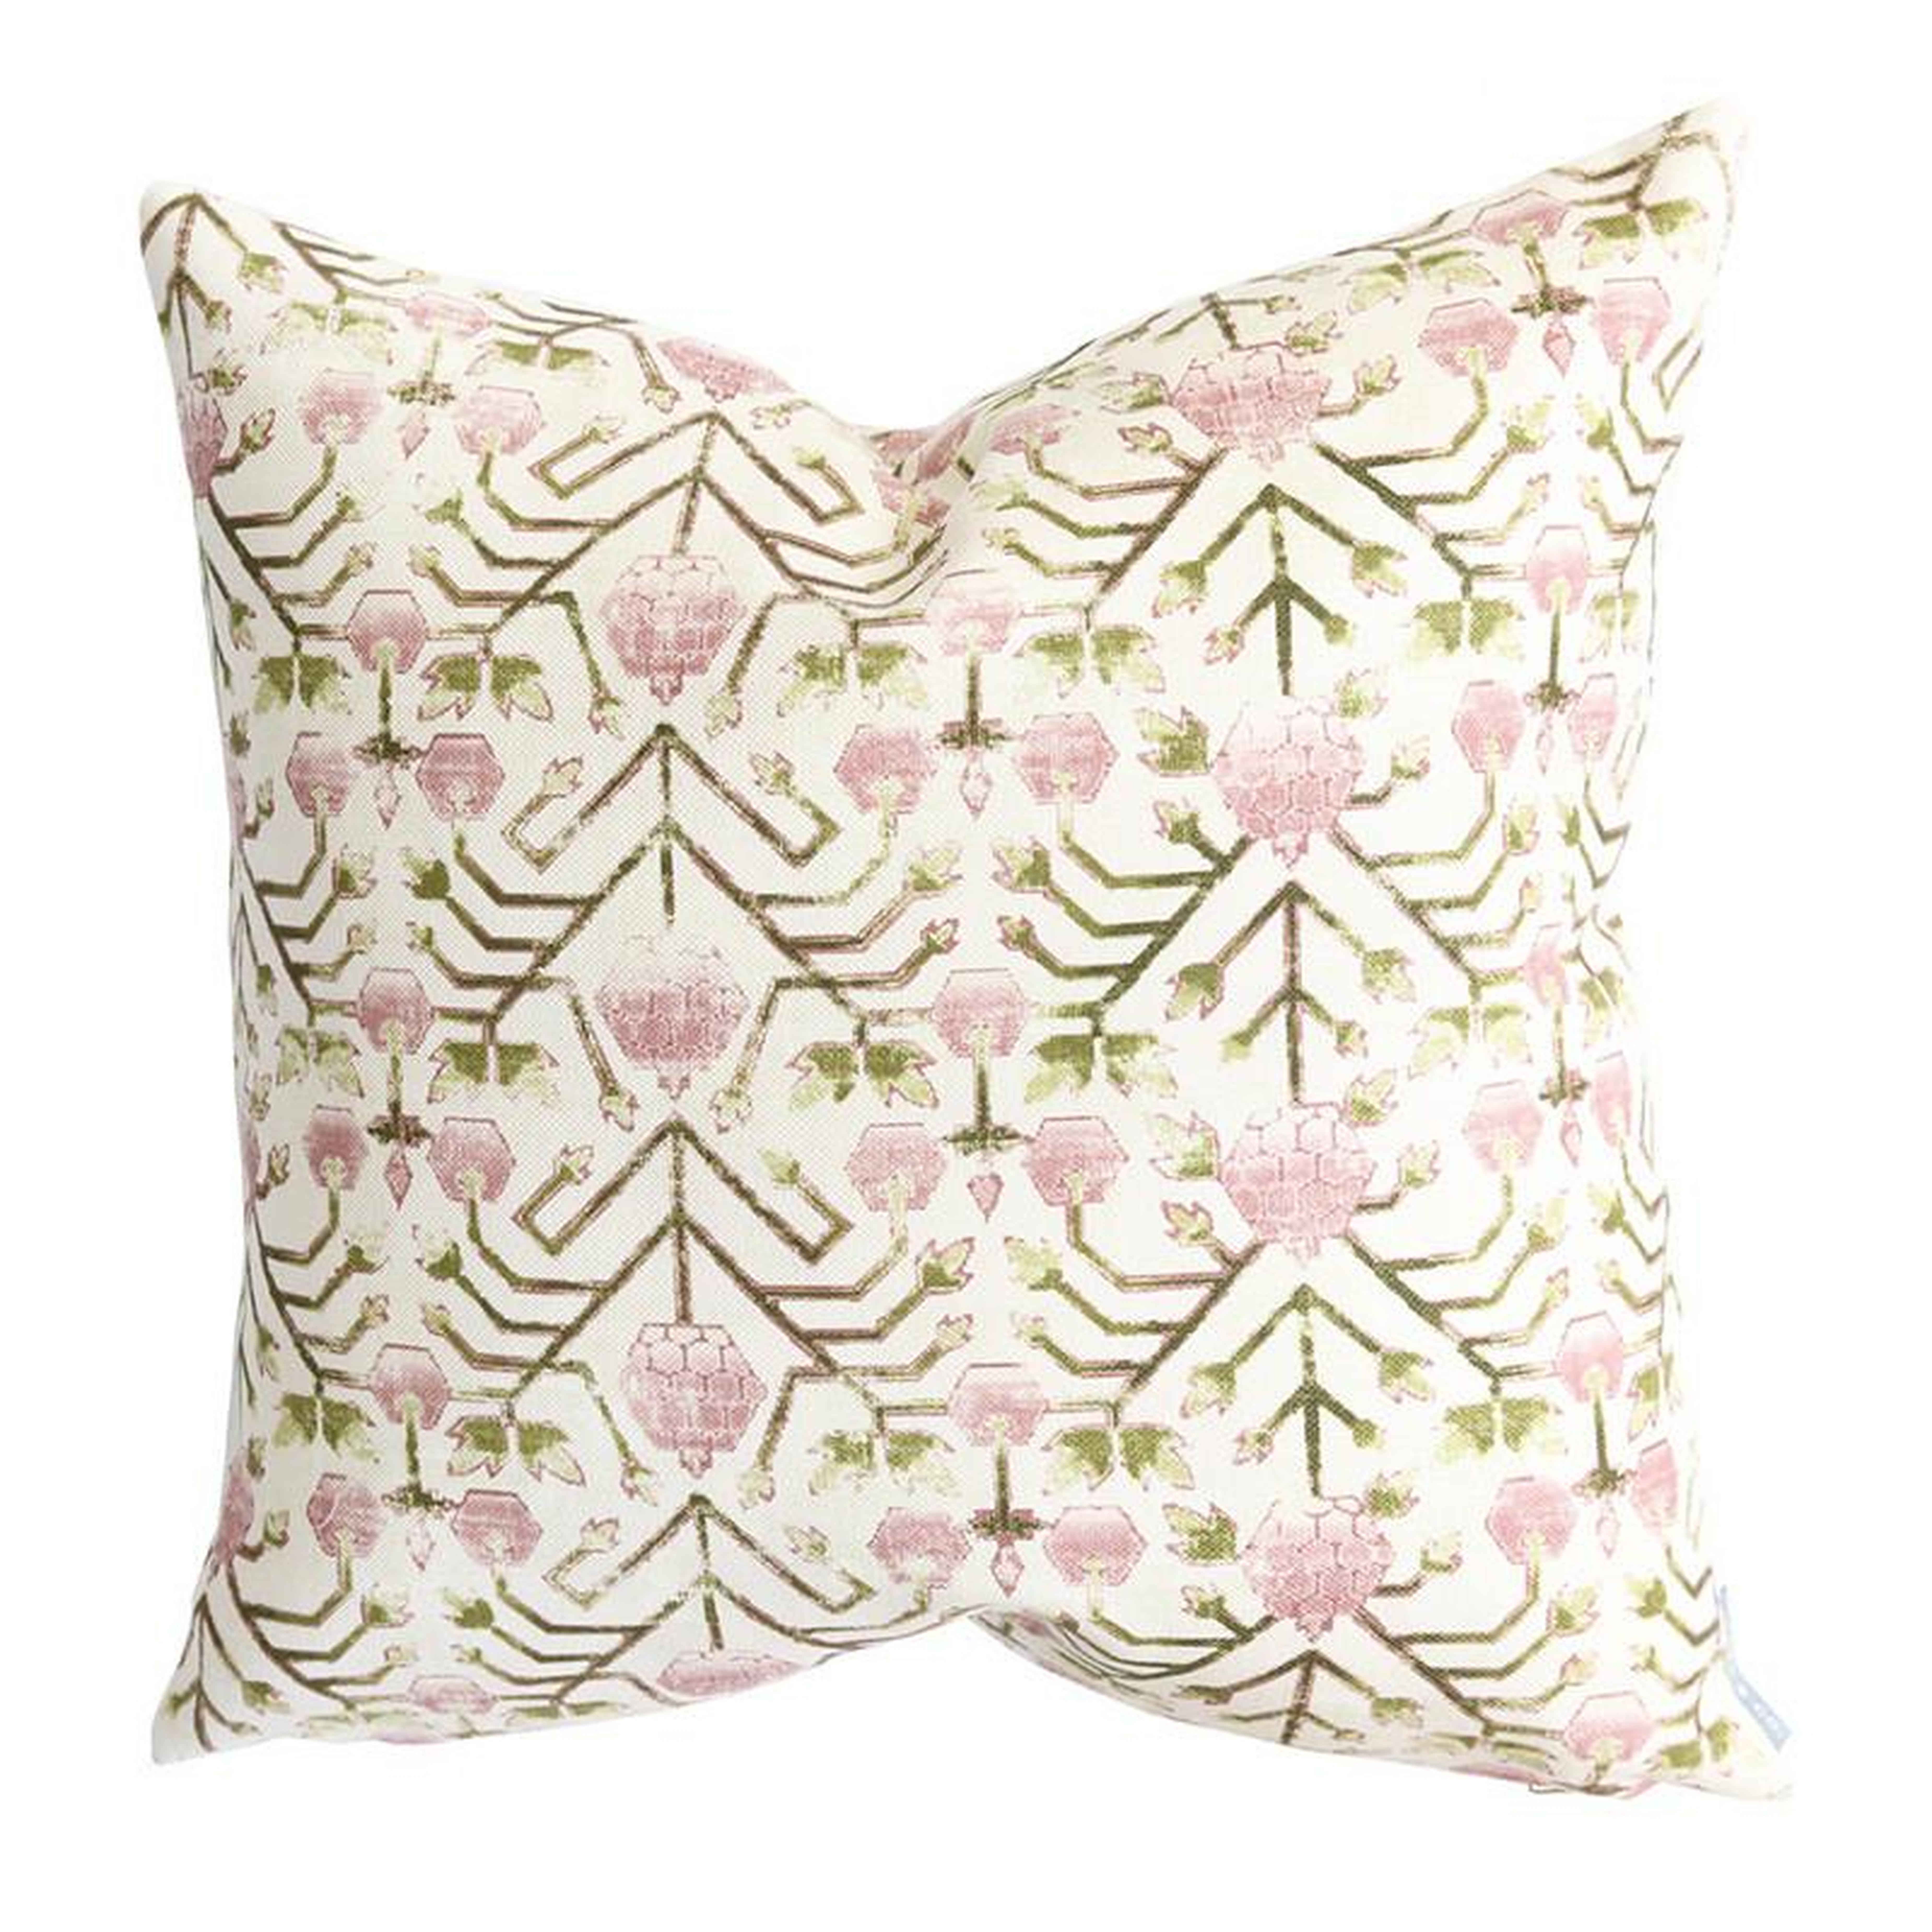 HARPER PILLOW WITHOUT INSERT, 24" x 24" - McGee & Co.